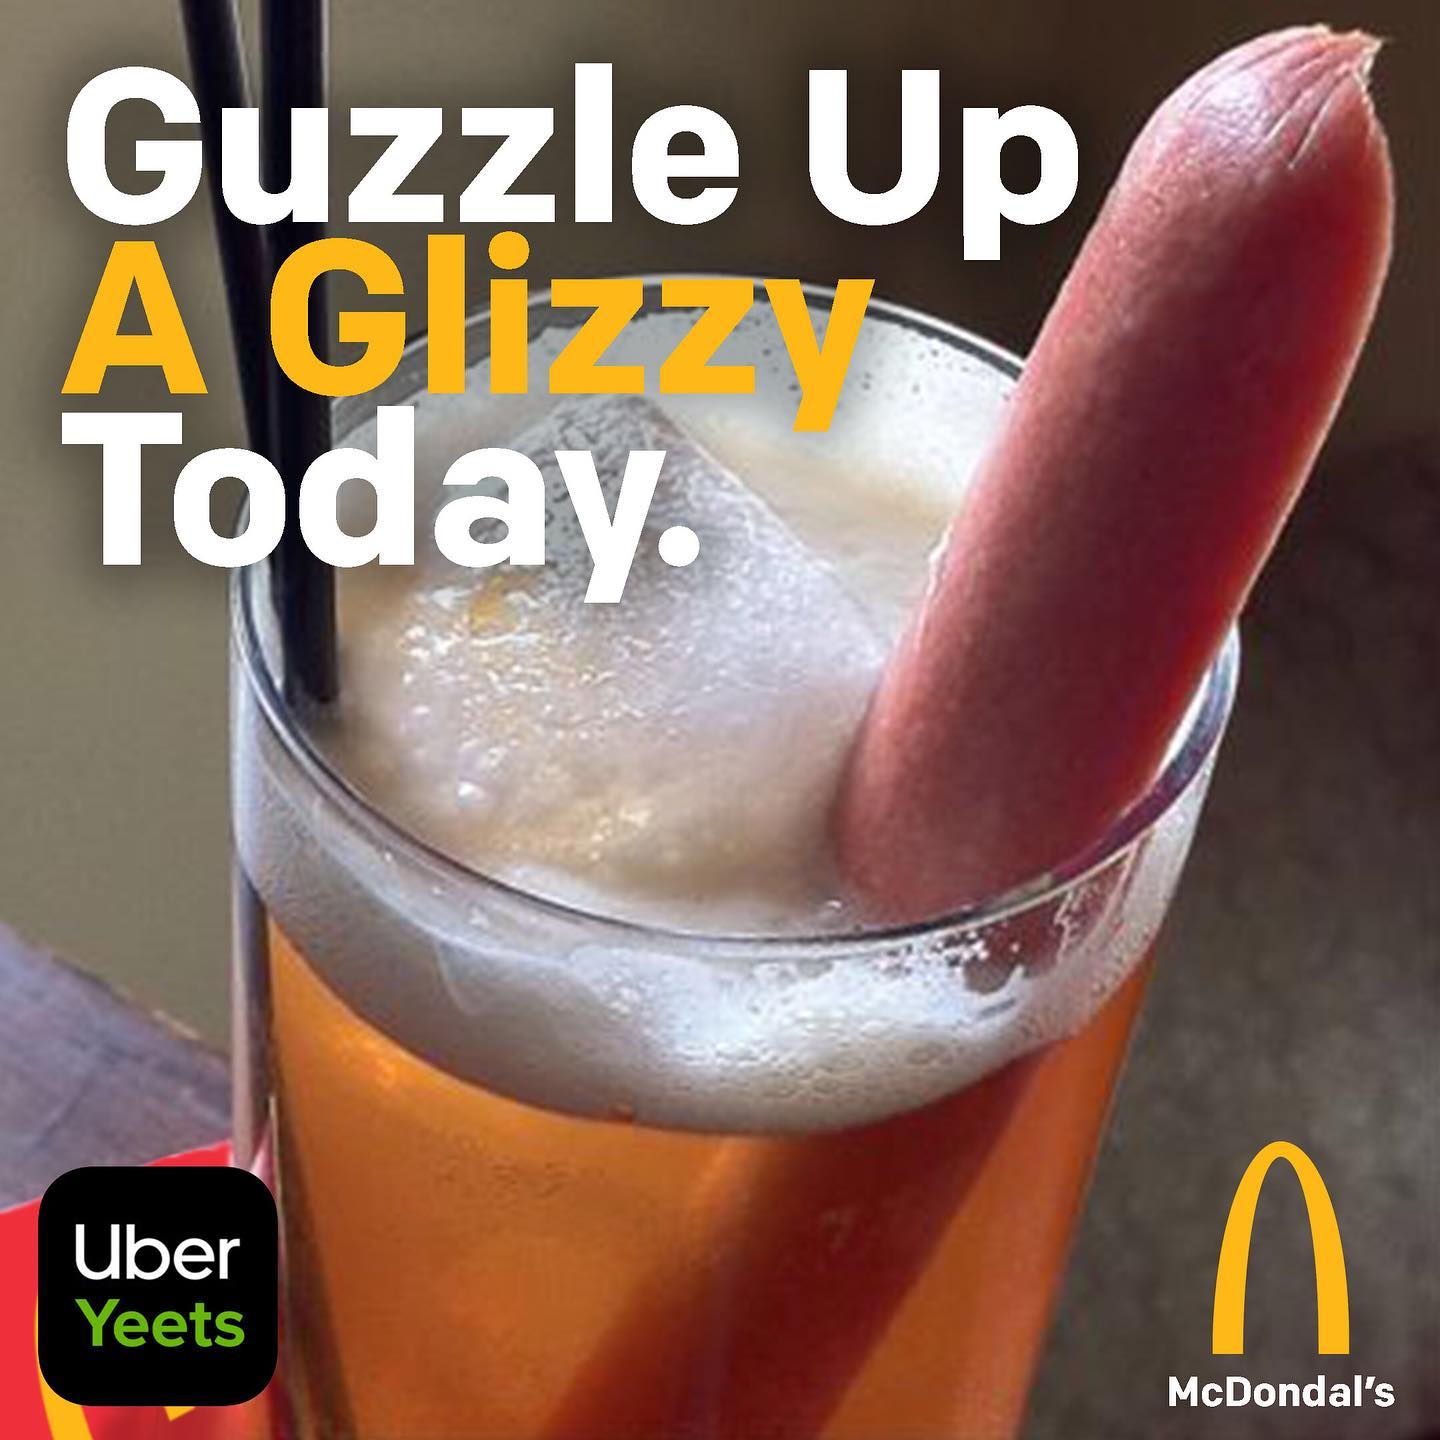 glizzy -  non alcoholic beverage - Guzzle Up A Glizzy Today Uber Yeets C McDondal's